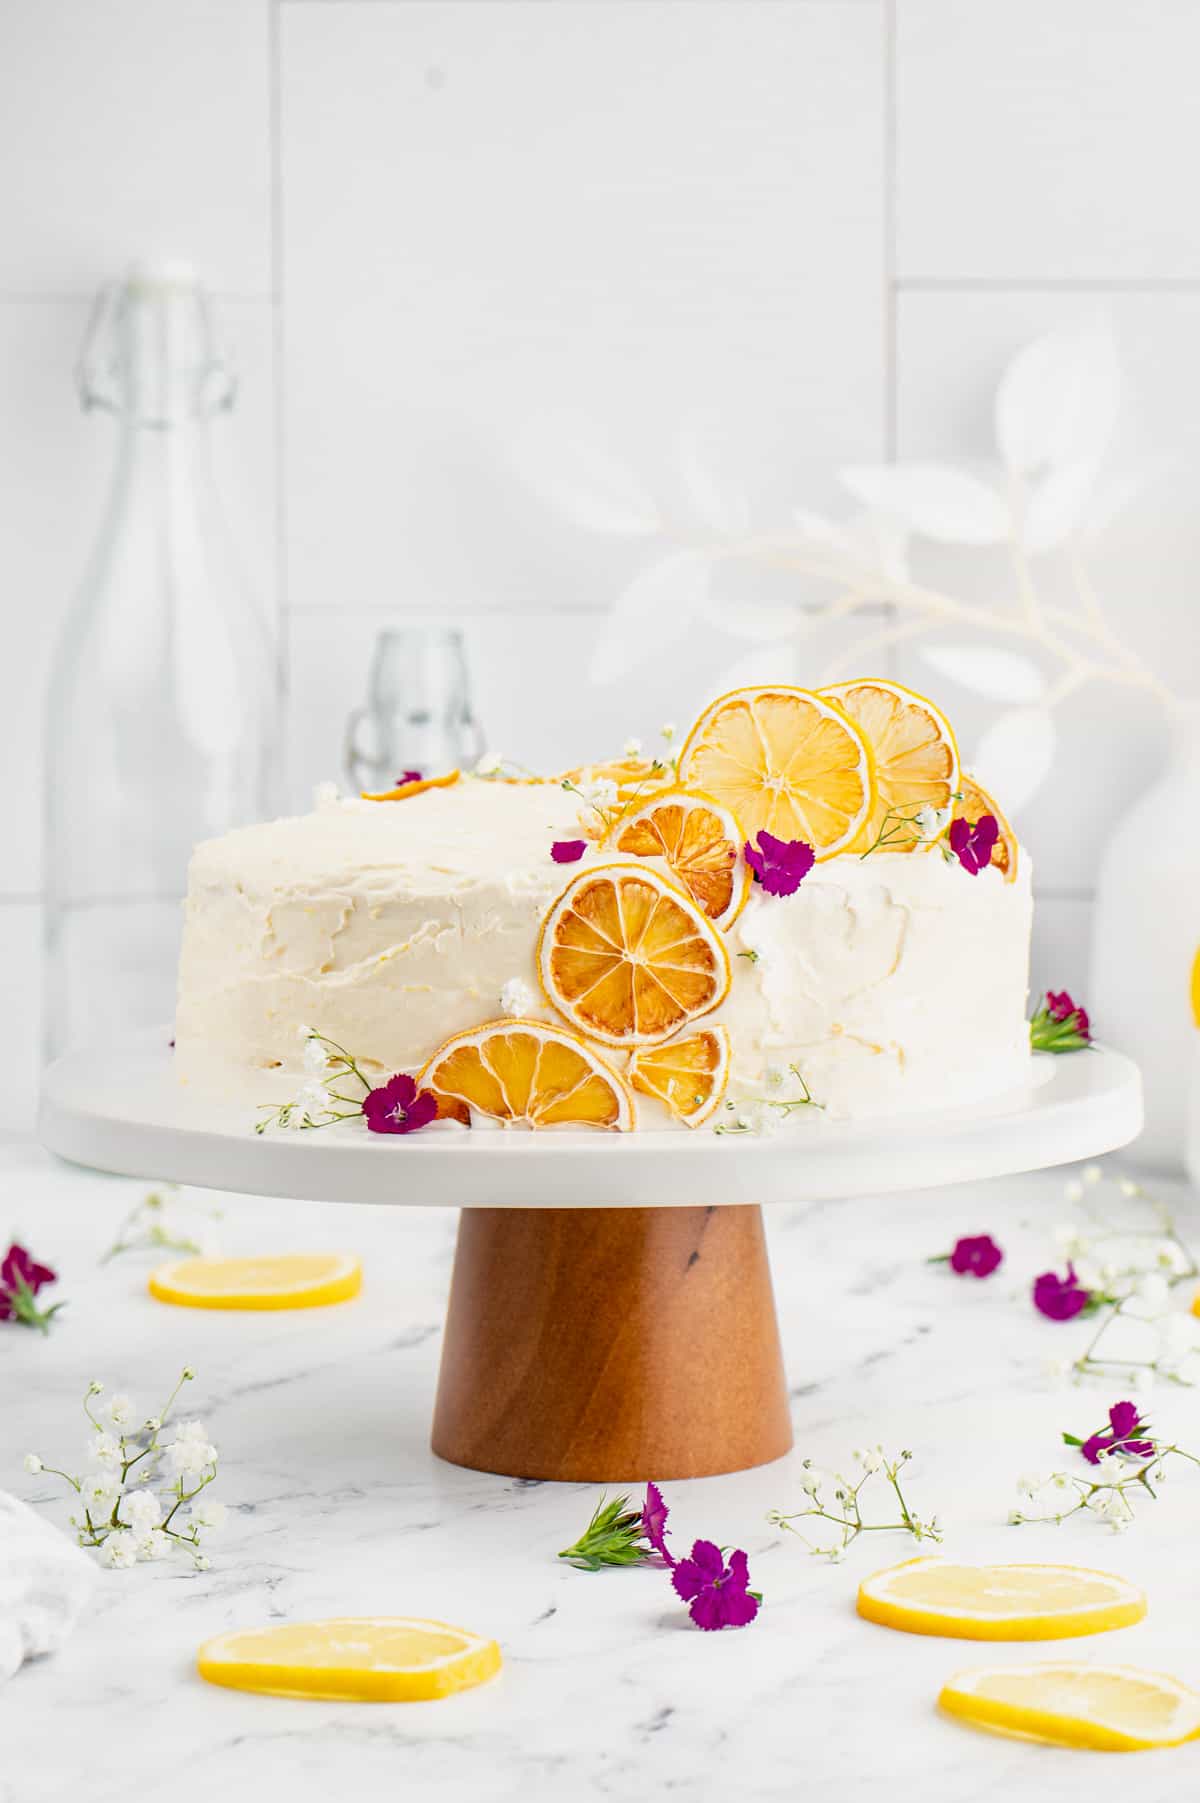 Lemon cake decorated with dehydrated lemon slices and edible flowers.